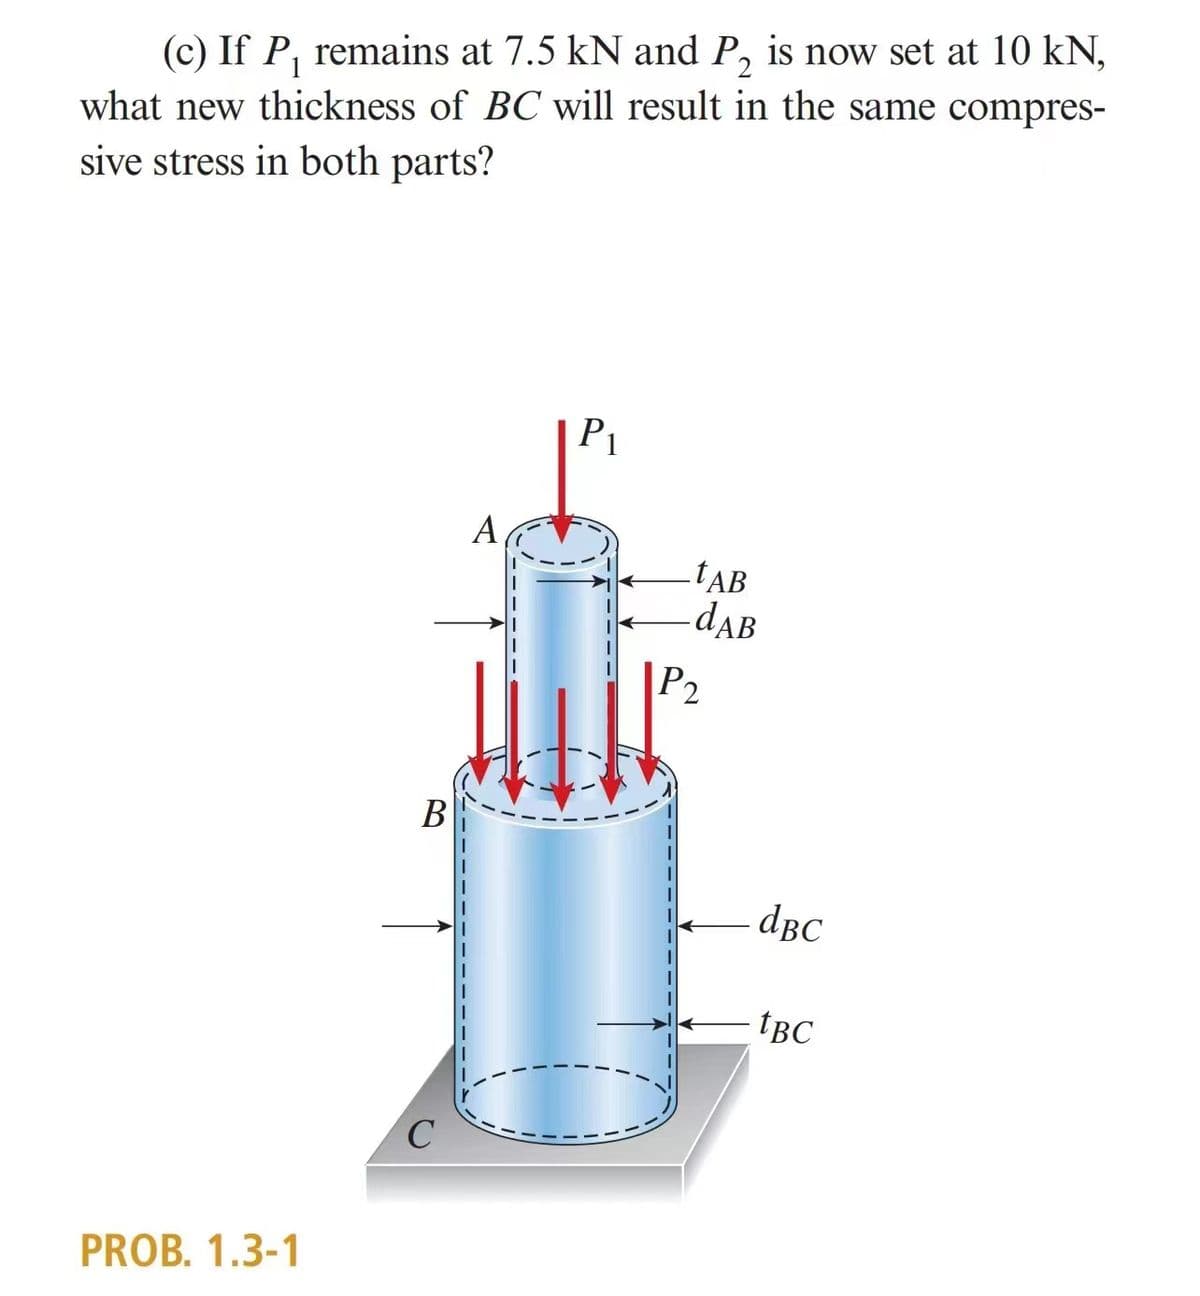 (c) If P₁ remains at 7.5 kN and P₂ is now set at 10 kN,
what new thickness of BC will result in the same compres-
sive stress in both parts?
PROB. 1.3-1
B
C
A
P₁
TAB
-dAB
P₂
dBc
tBC